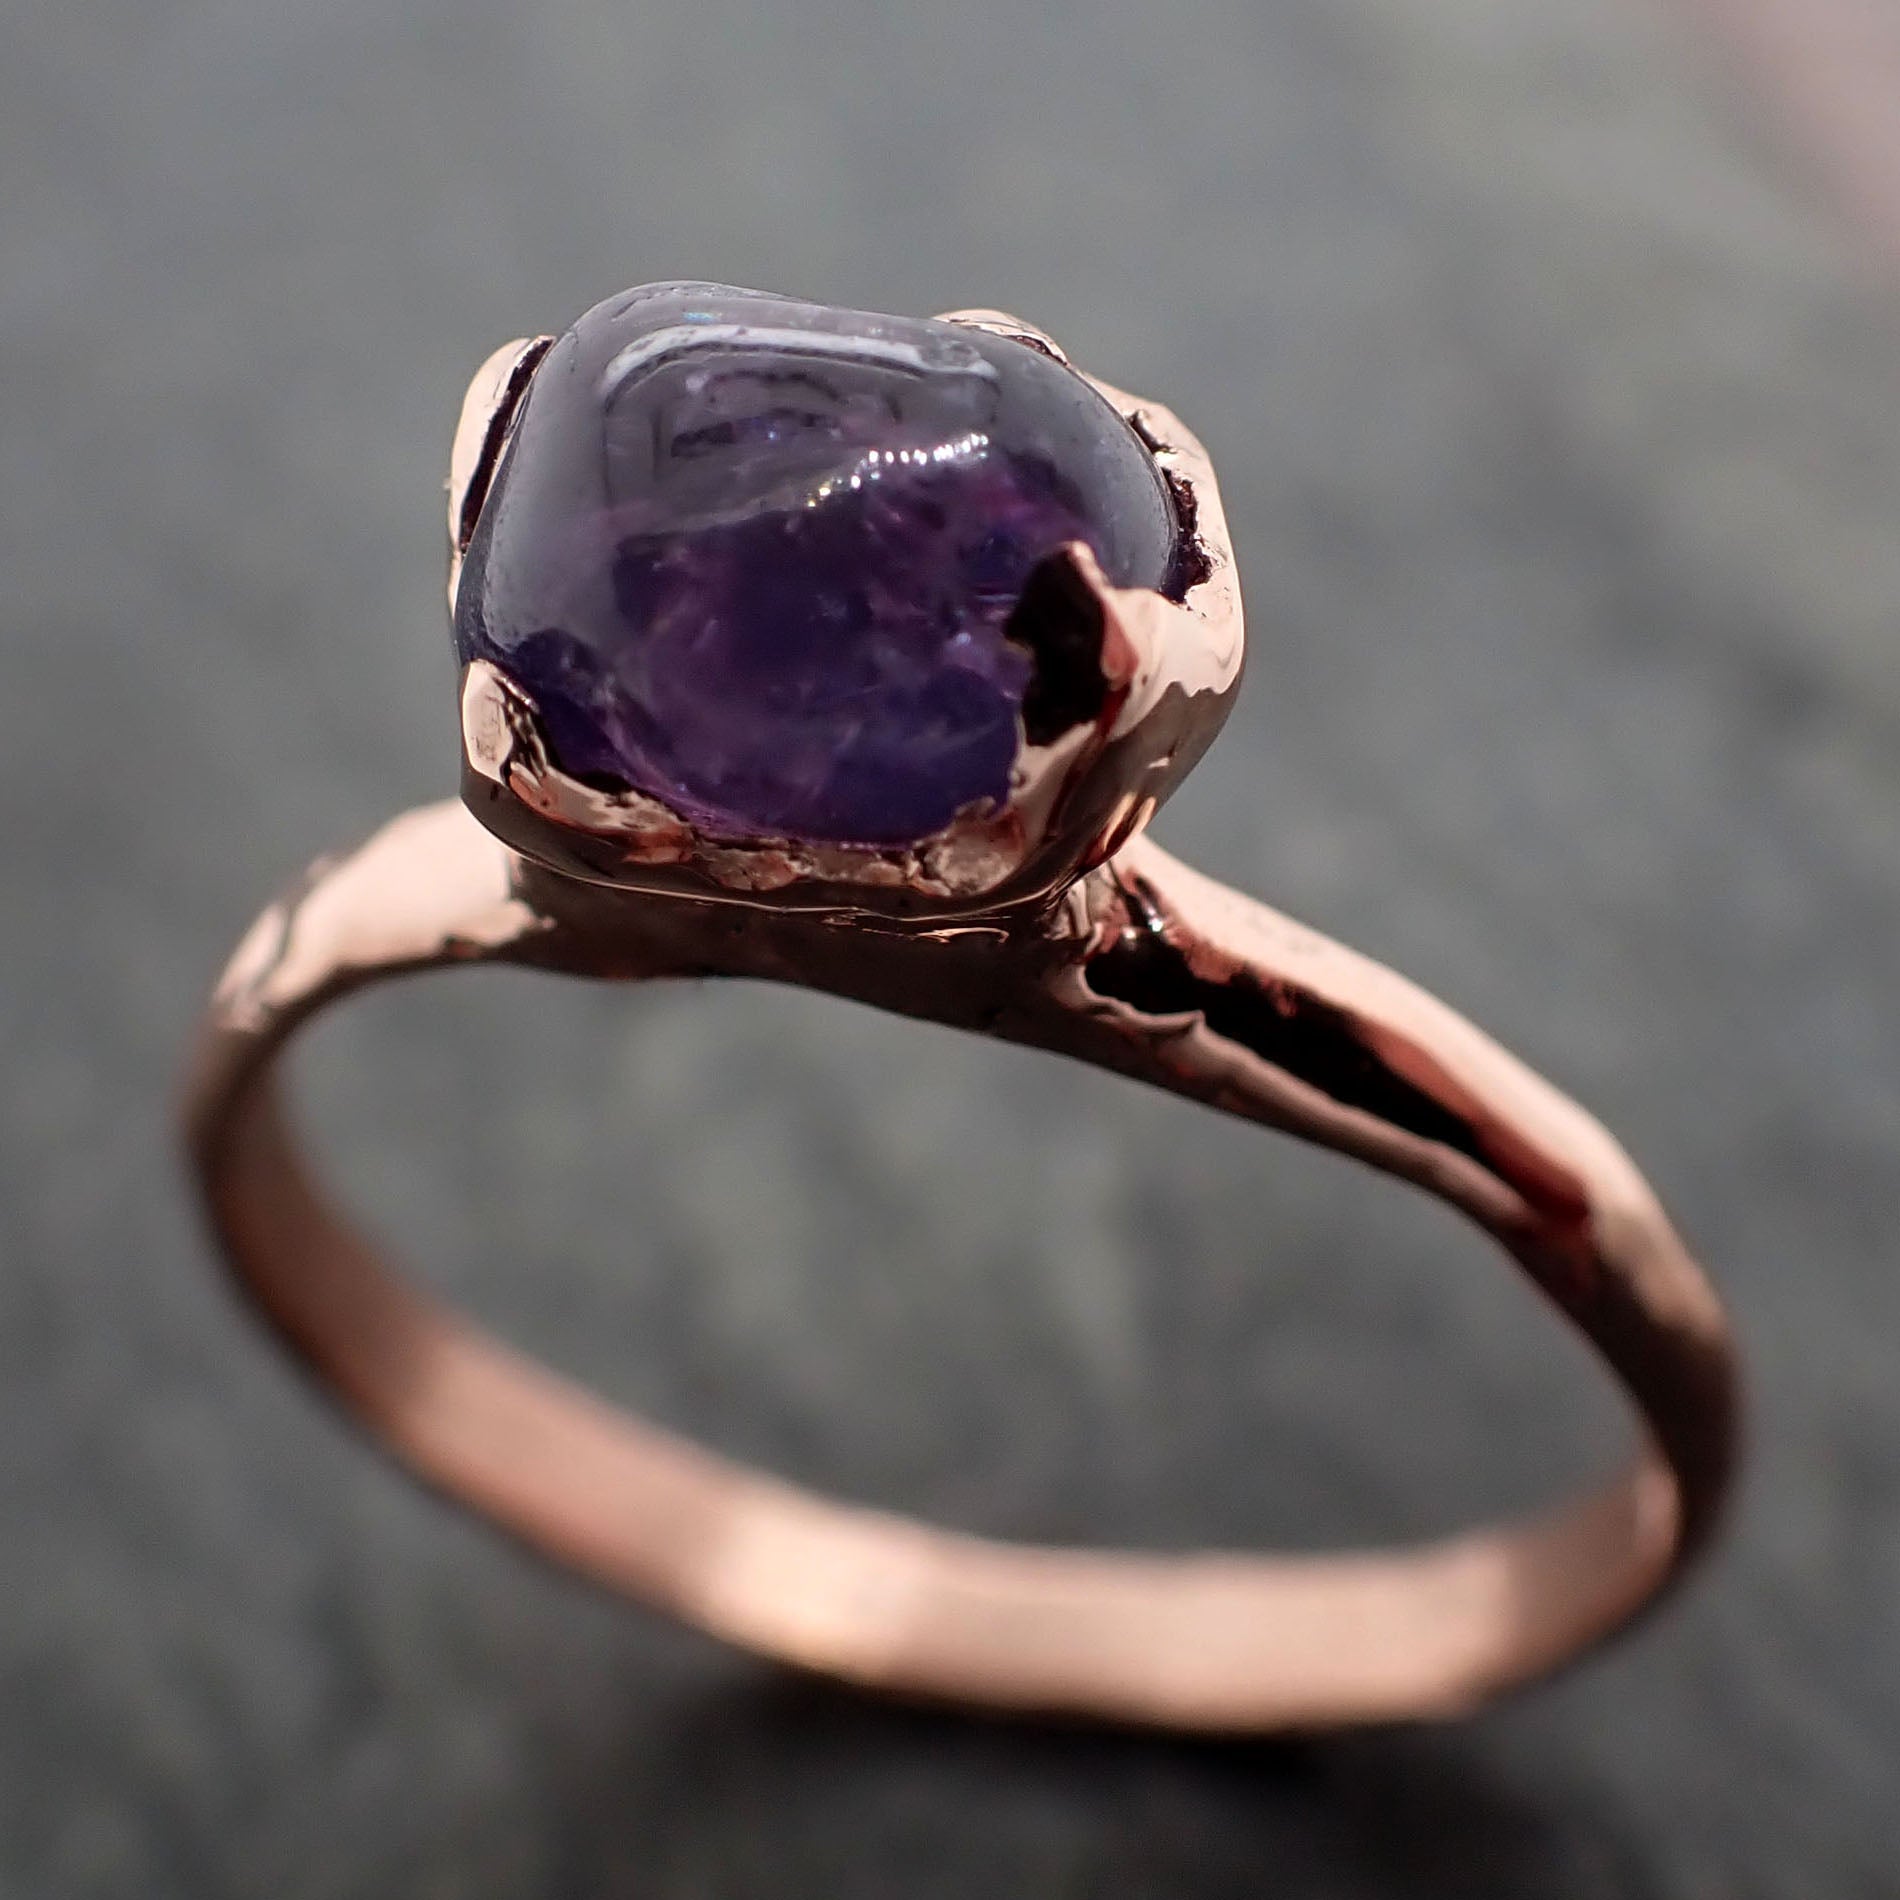 Sapphire  Purple polished 14k Rose gold Solitaire gemstone ring 2869